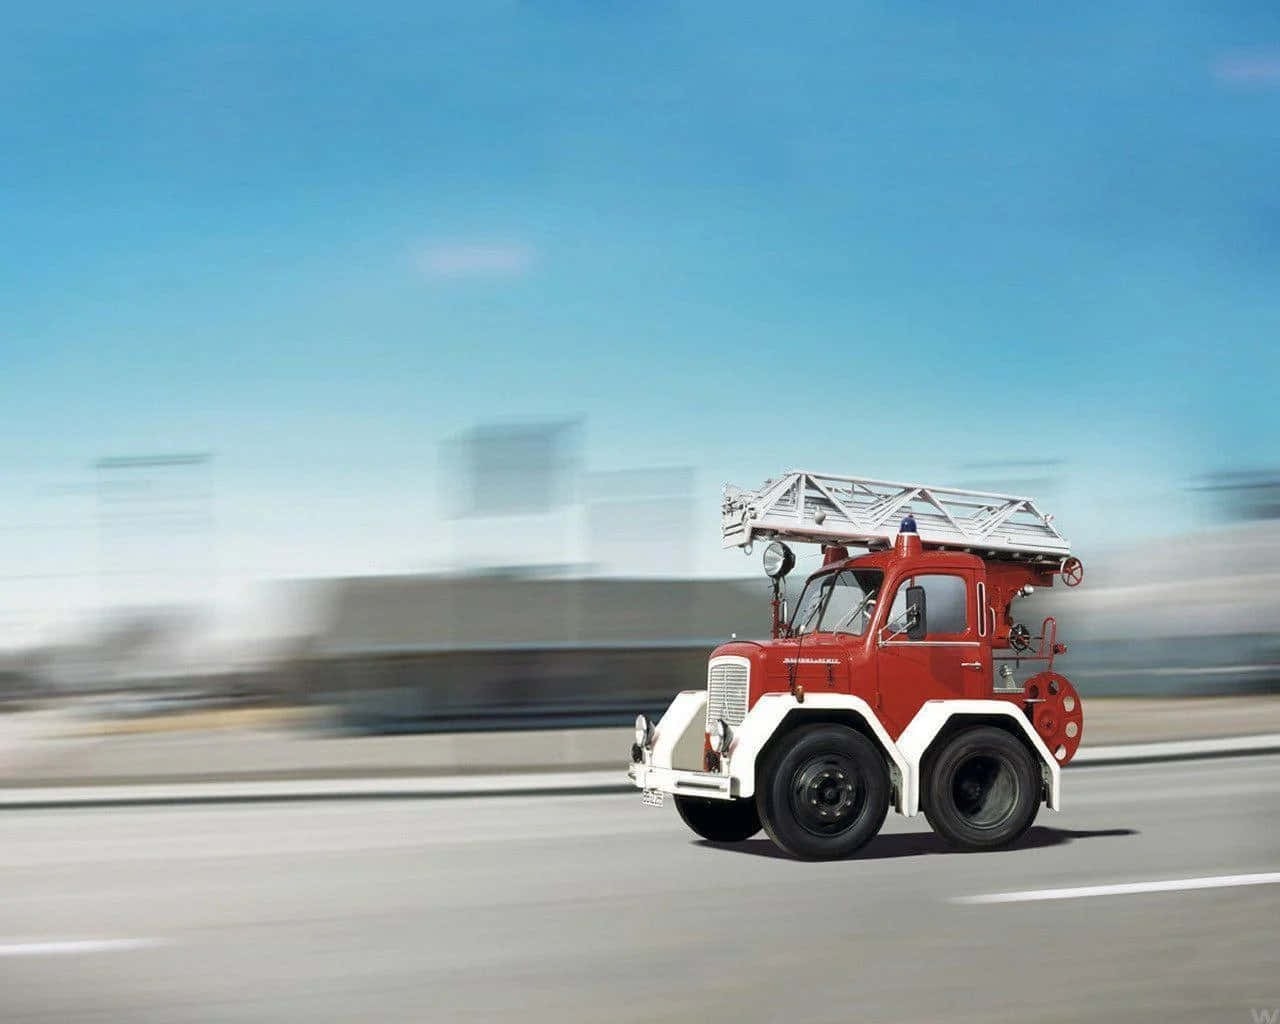 A Red Fire Truck Driving Down The Road